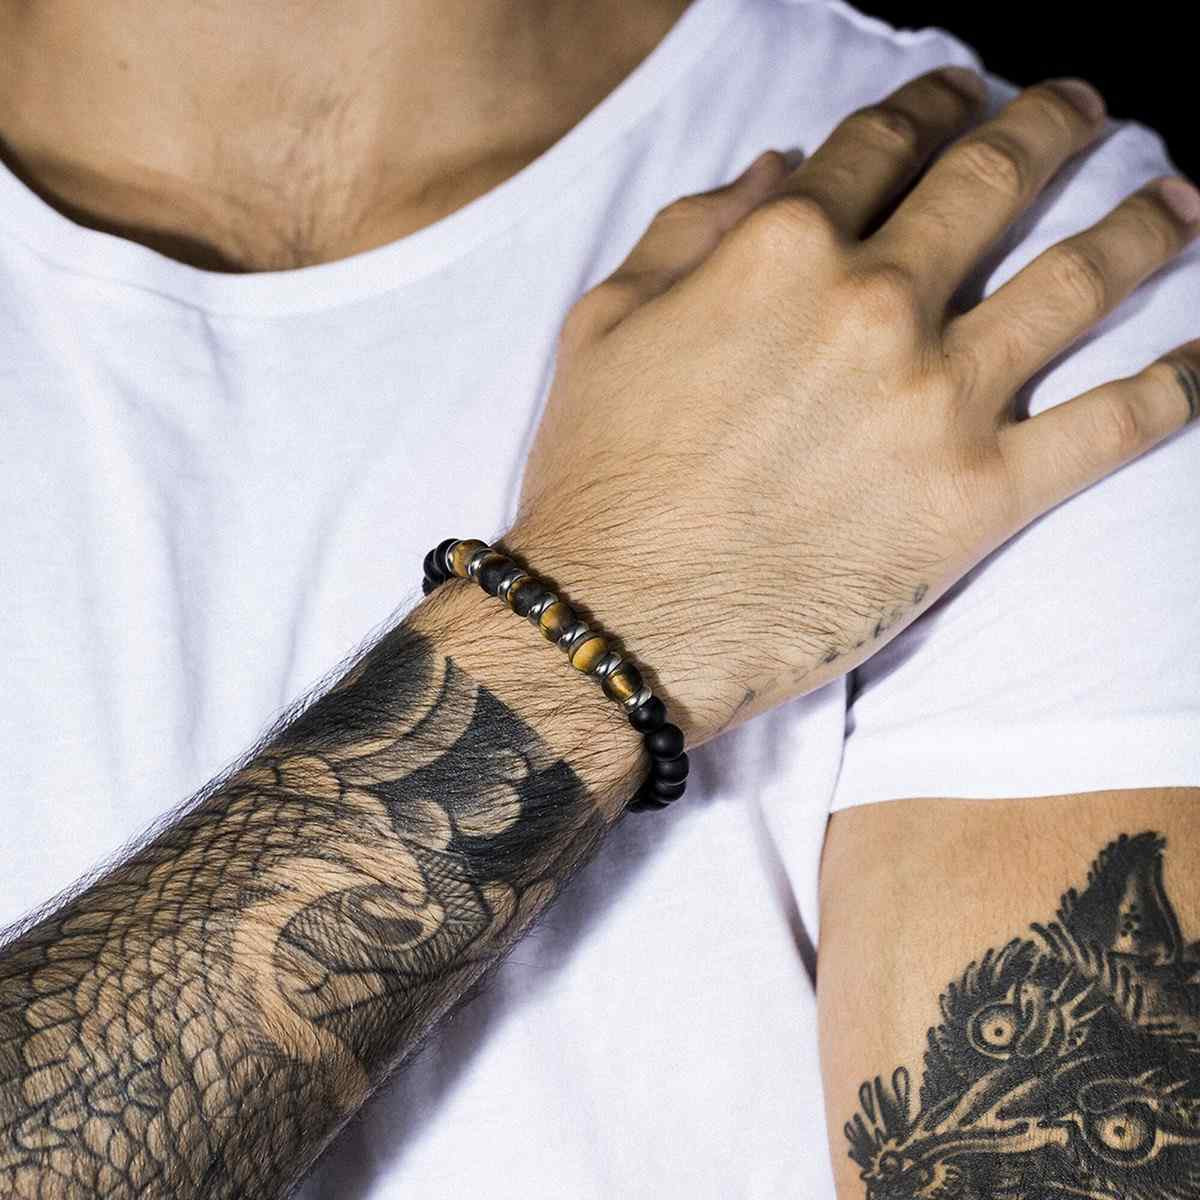 100 Armband Tattoos for Men and Women - The Body is a Canvas | Armband  tattoo design, Armband tattoos for men, Arm band tattoo